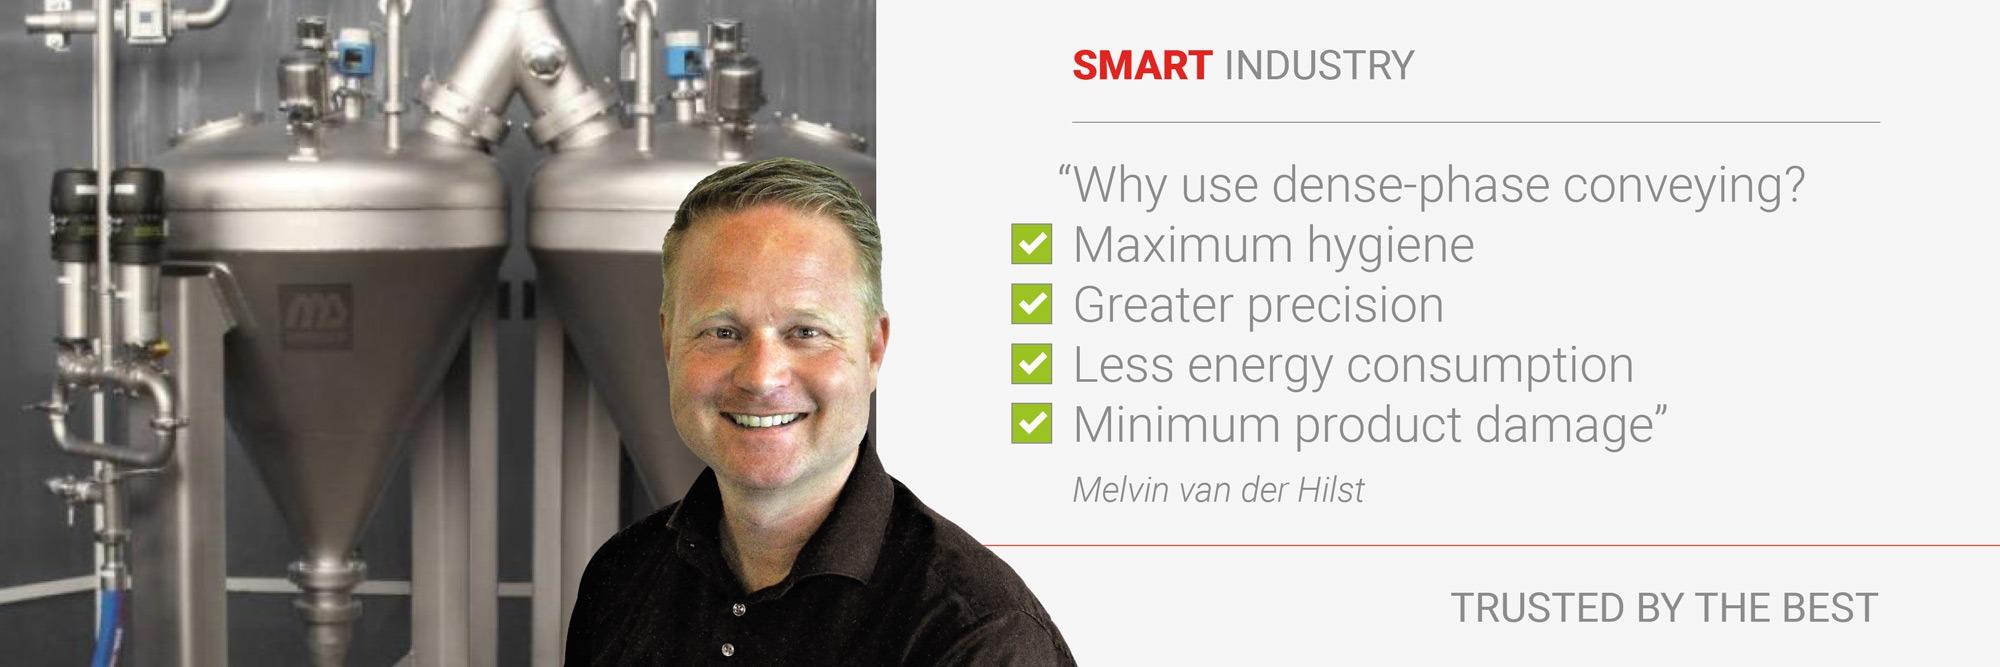 Smart Industry special - quote Melvin